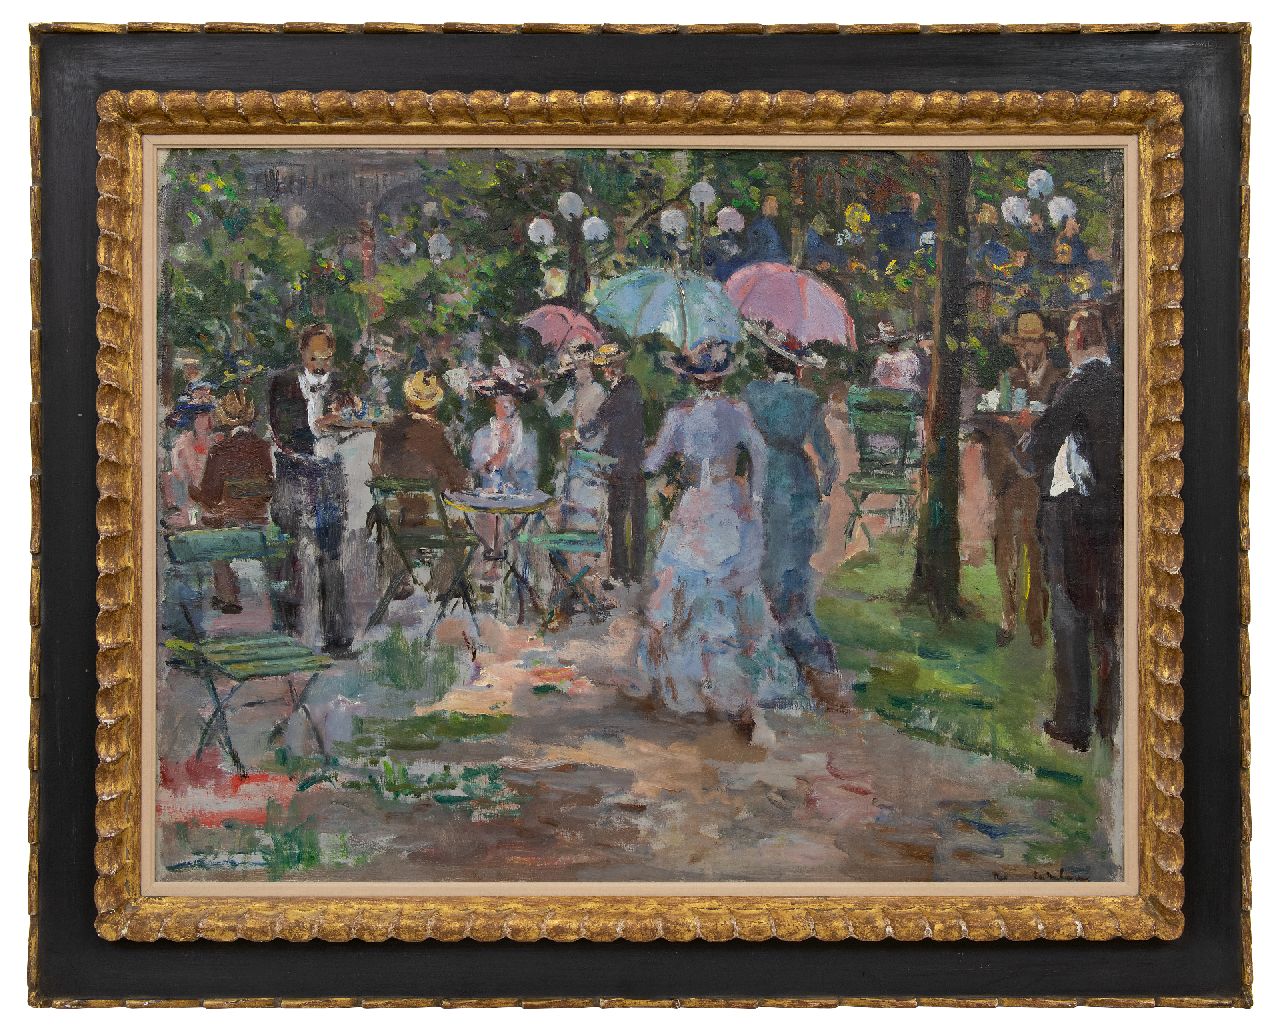 Neuburger E.  | Eliazer 'Elie' Neuburger, A concert in the garden of the Galerij, Amsterdam, 6 March 1910, oil on canvas 64.9 x 85.0 cm, signed l.r. and pained ca. 1910